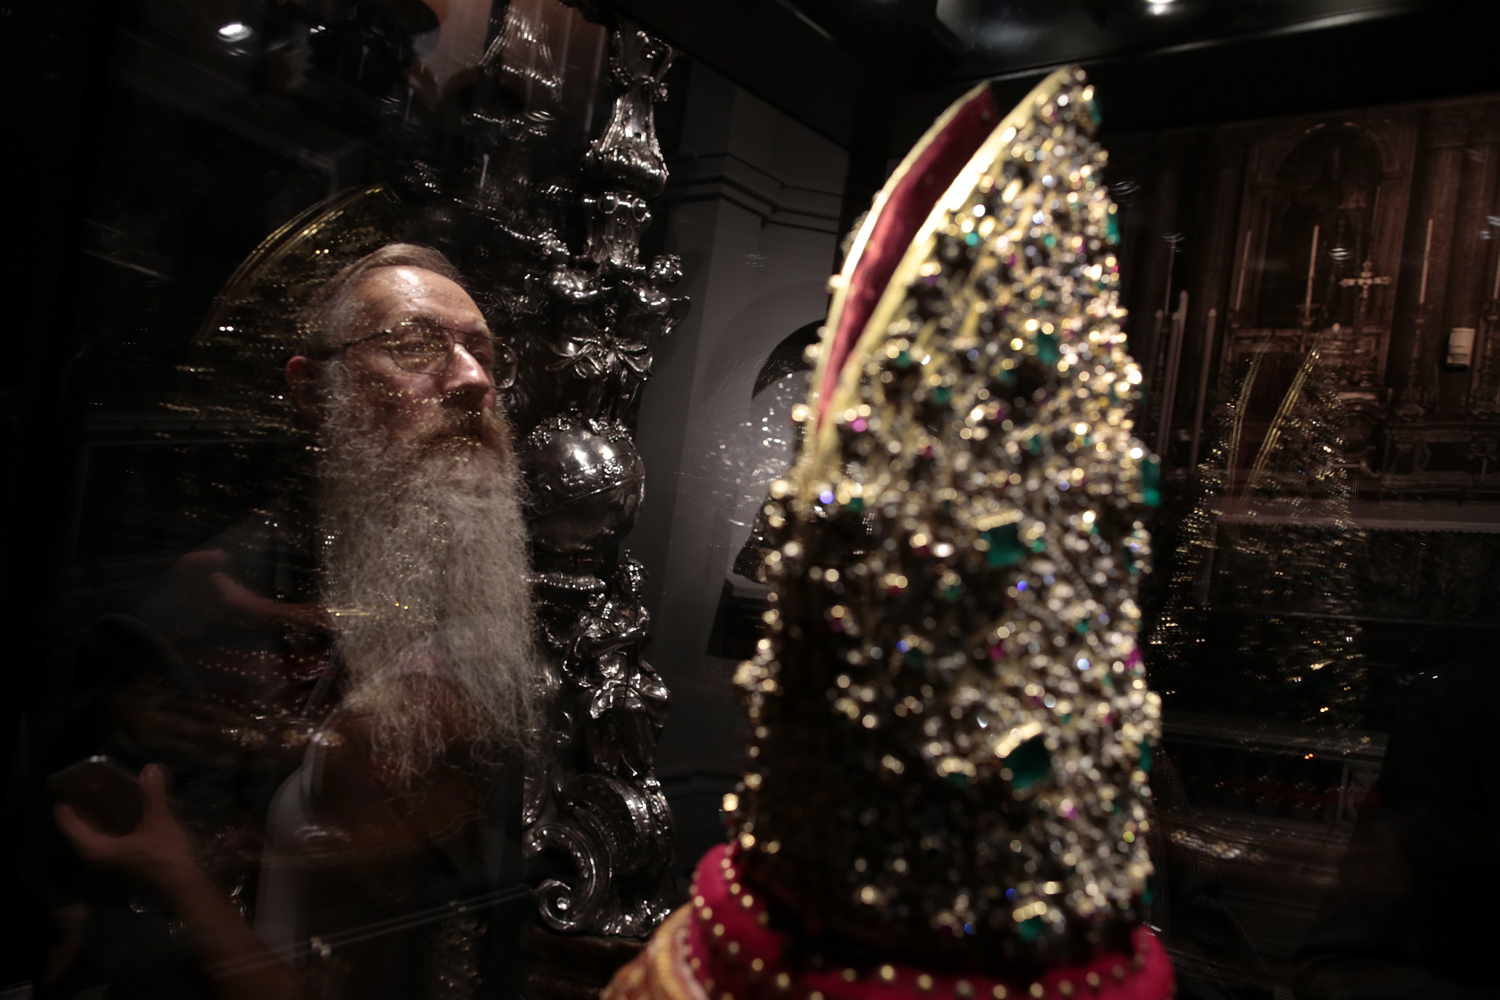 Oct. 29, 2013. A visitor looks at the Mitre of San Gennaro during an exhibition in Rome.